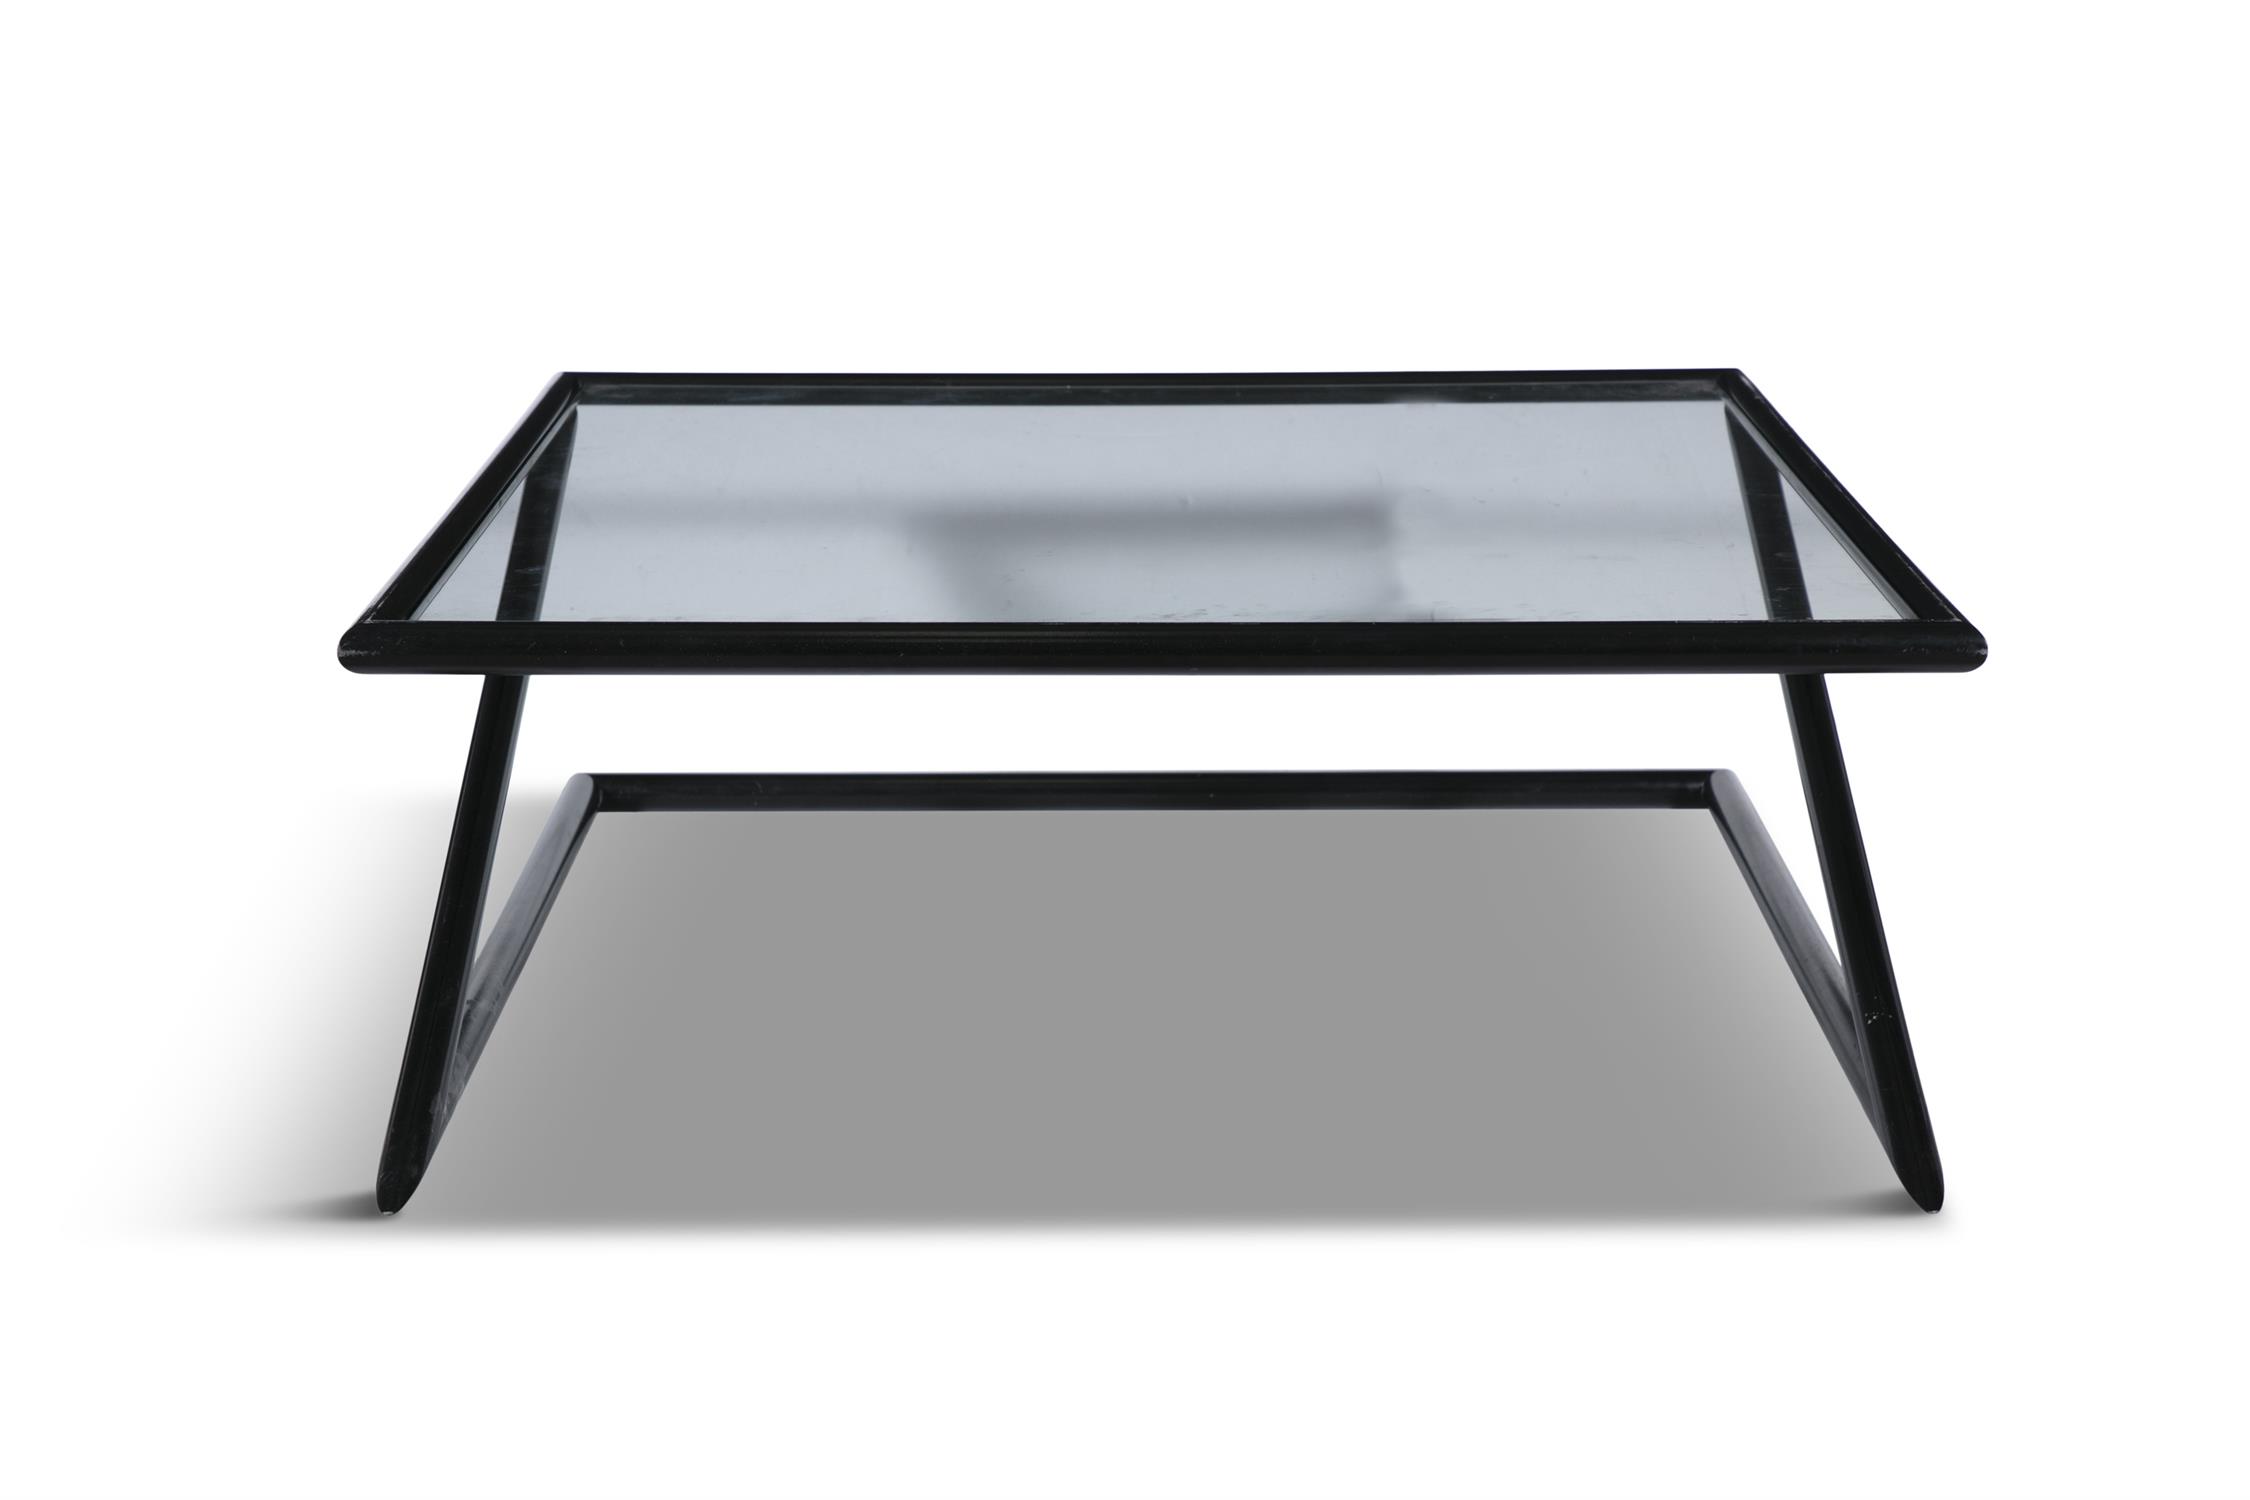 HARVINK Model Z coffee table by Harvink. c.1980. 97 x 97 x 37cm(h) - Image 2 of 3